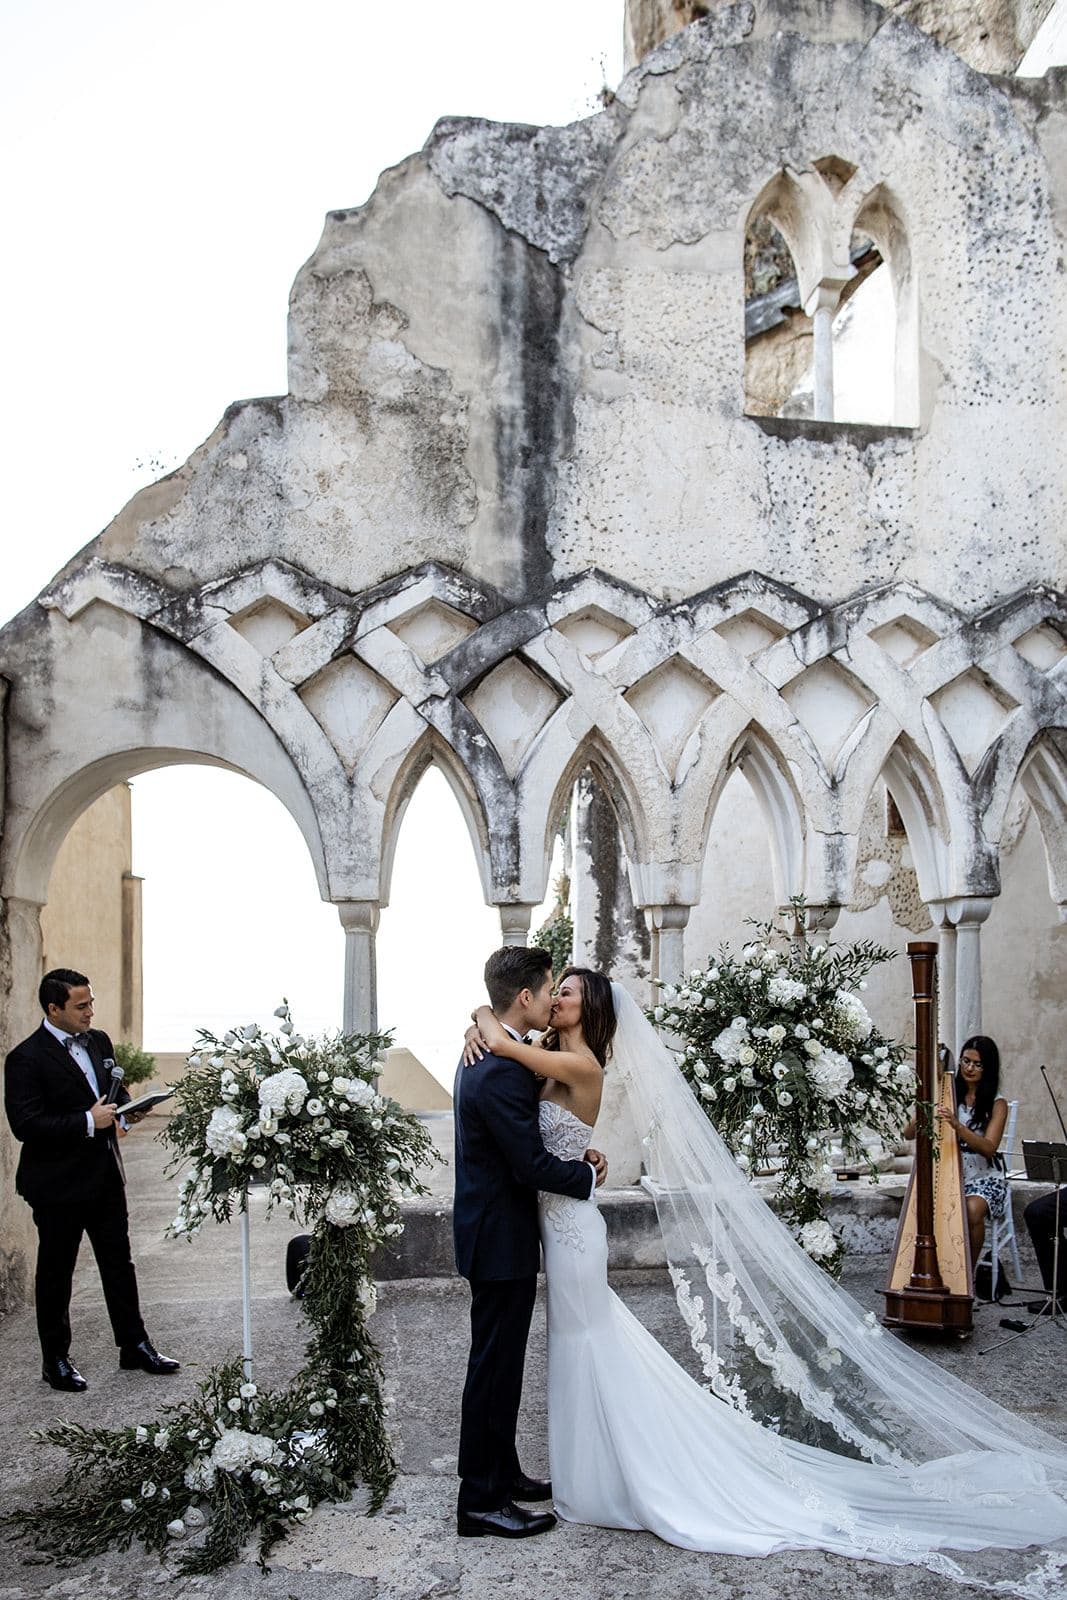 Bride and groom kiss after wedding ceremony at Grand Hotel Convento